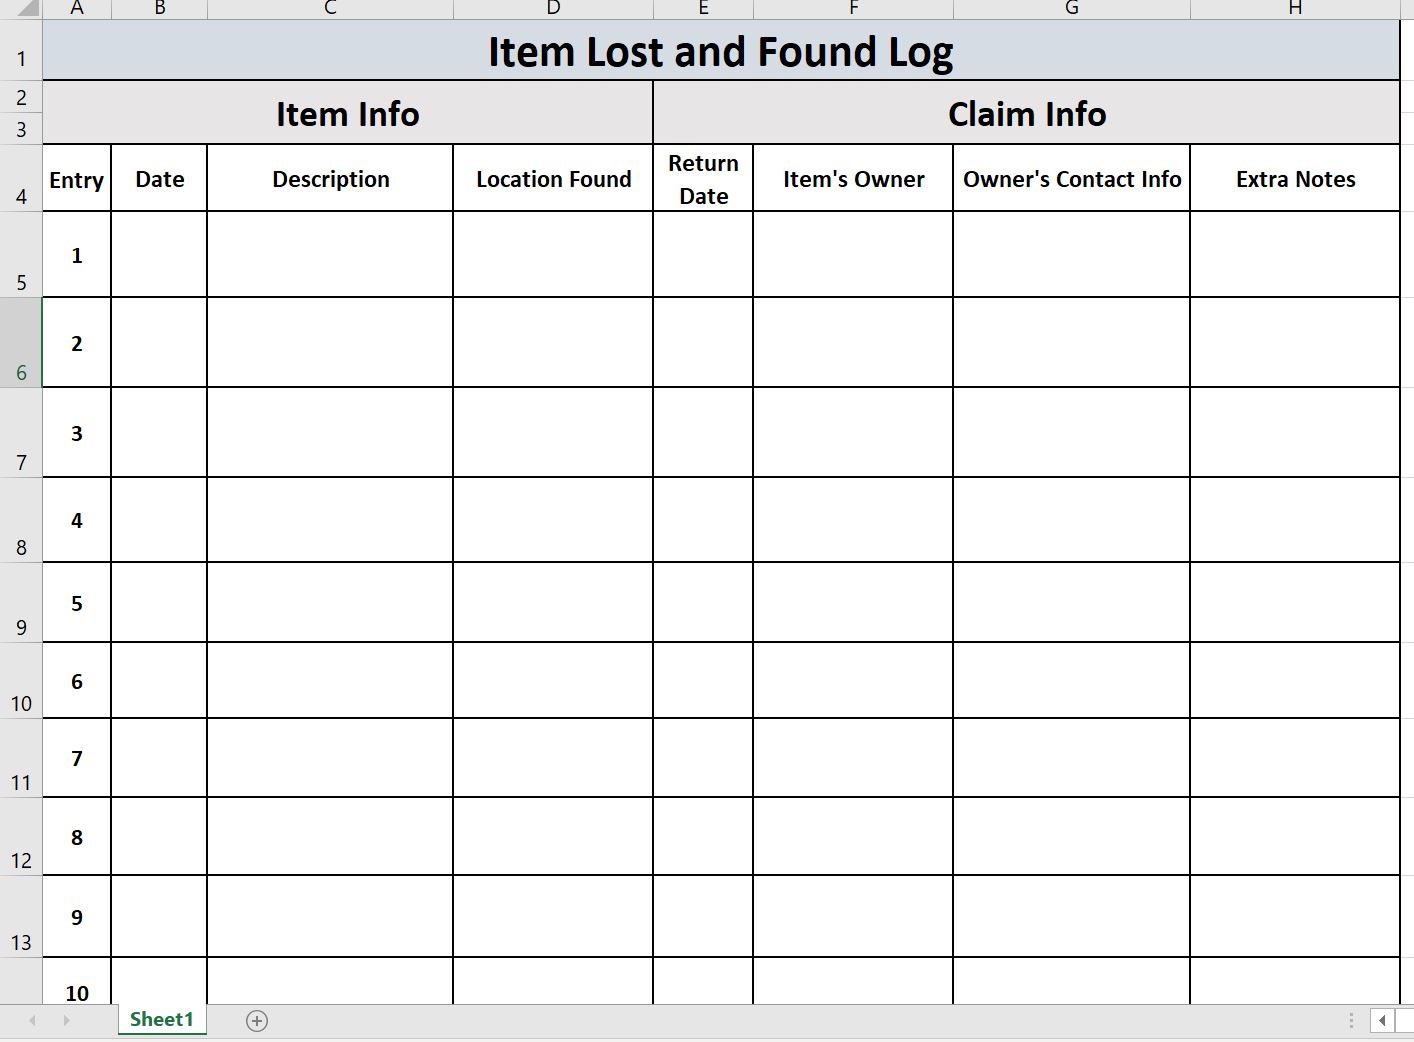 The Admin Helper Download Lost and Found Log Template (Excel and PDF